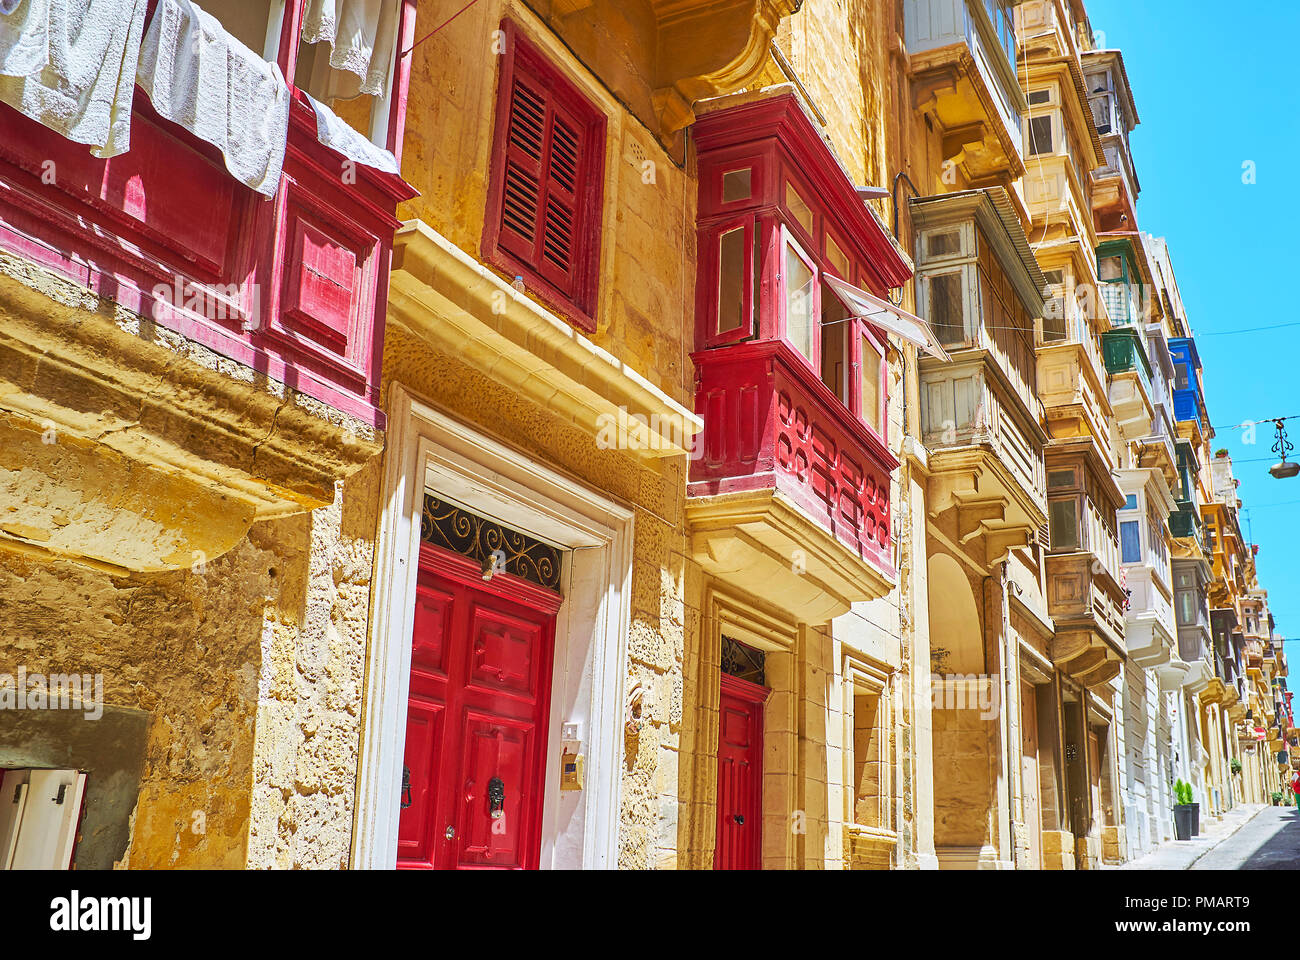 The city walk is the best choice to observe traditional Maltese balconies, decorated with patterns and painted in bright colors, Valletta, Malta. Stock Photo